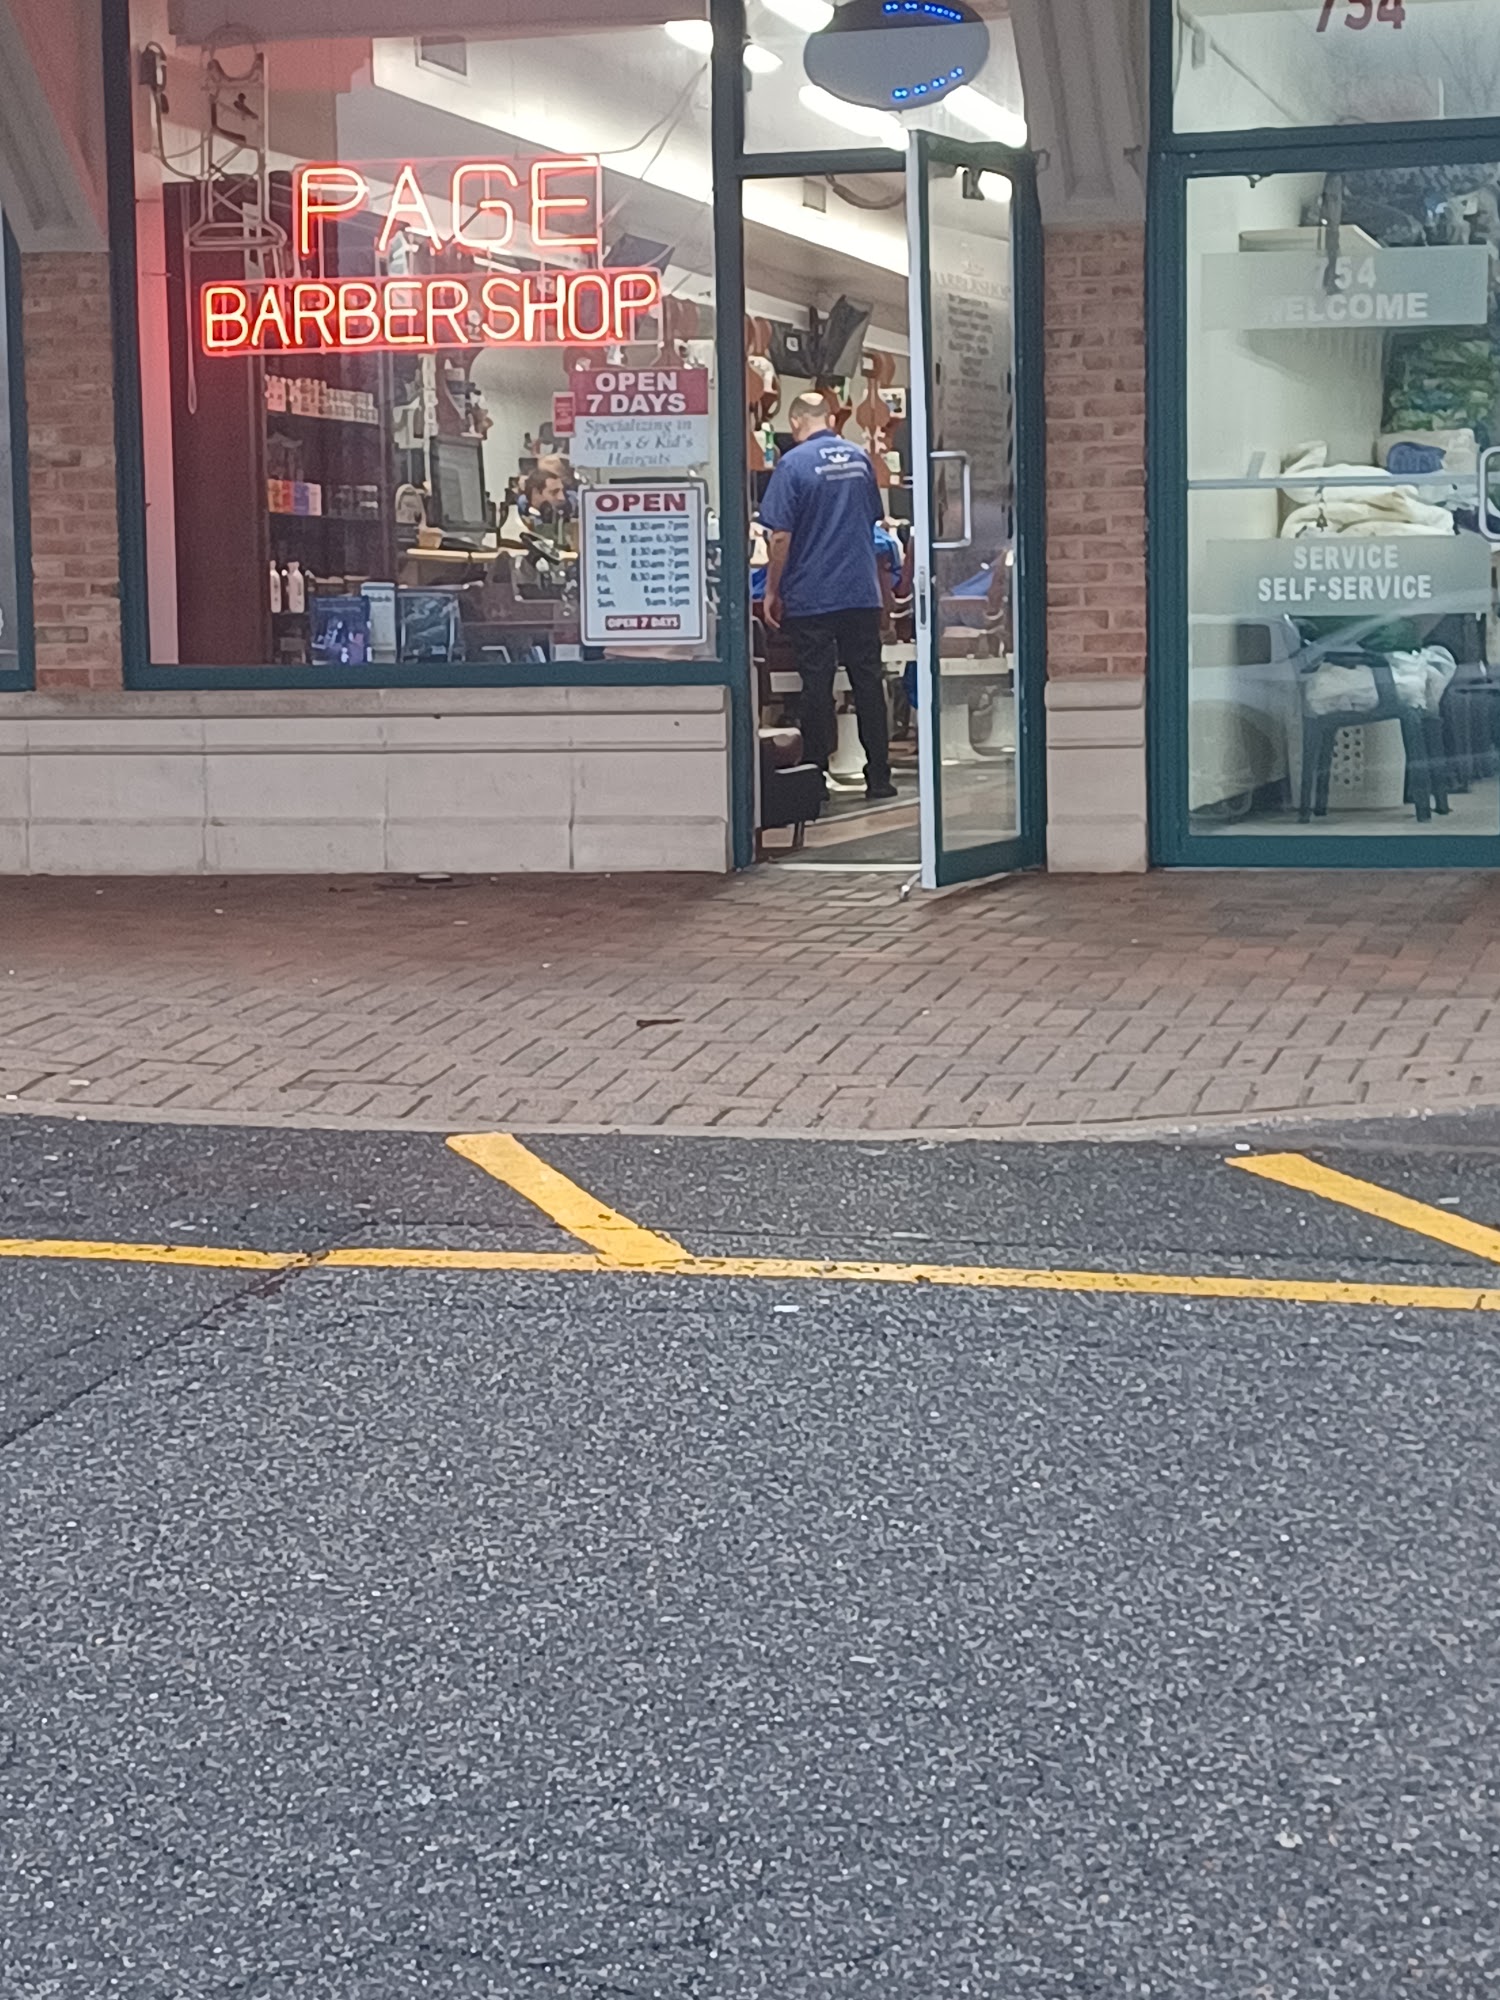 Page Barber Shop 752 Old Bethpage Rd, Old Bethpage New York 11804